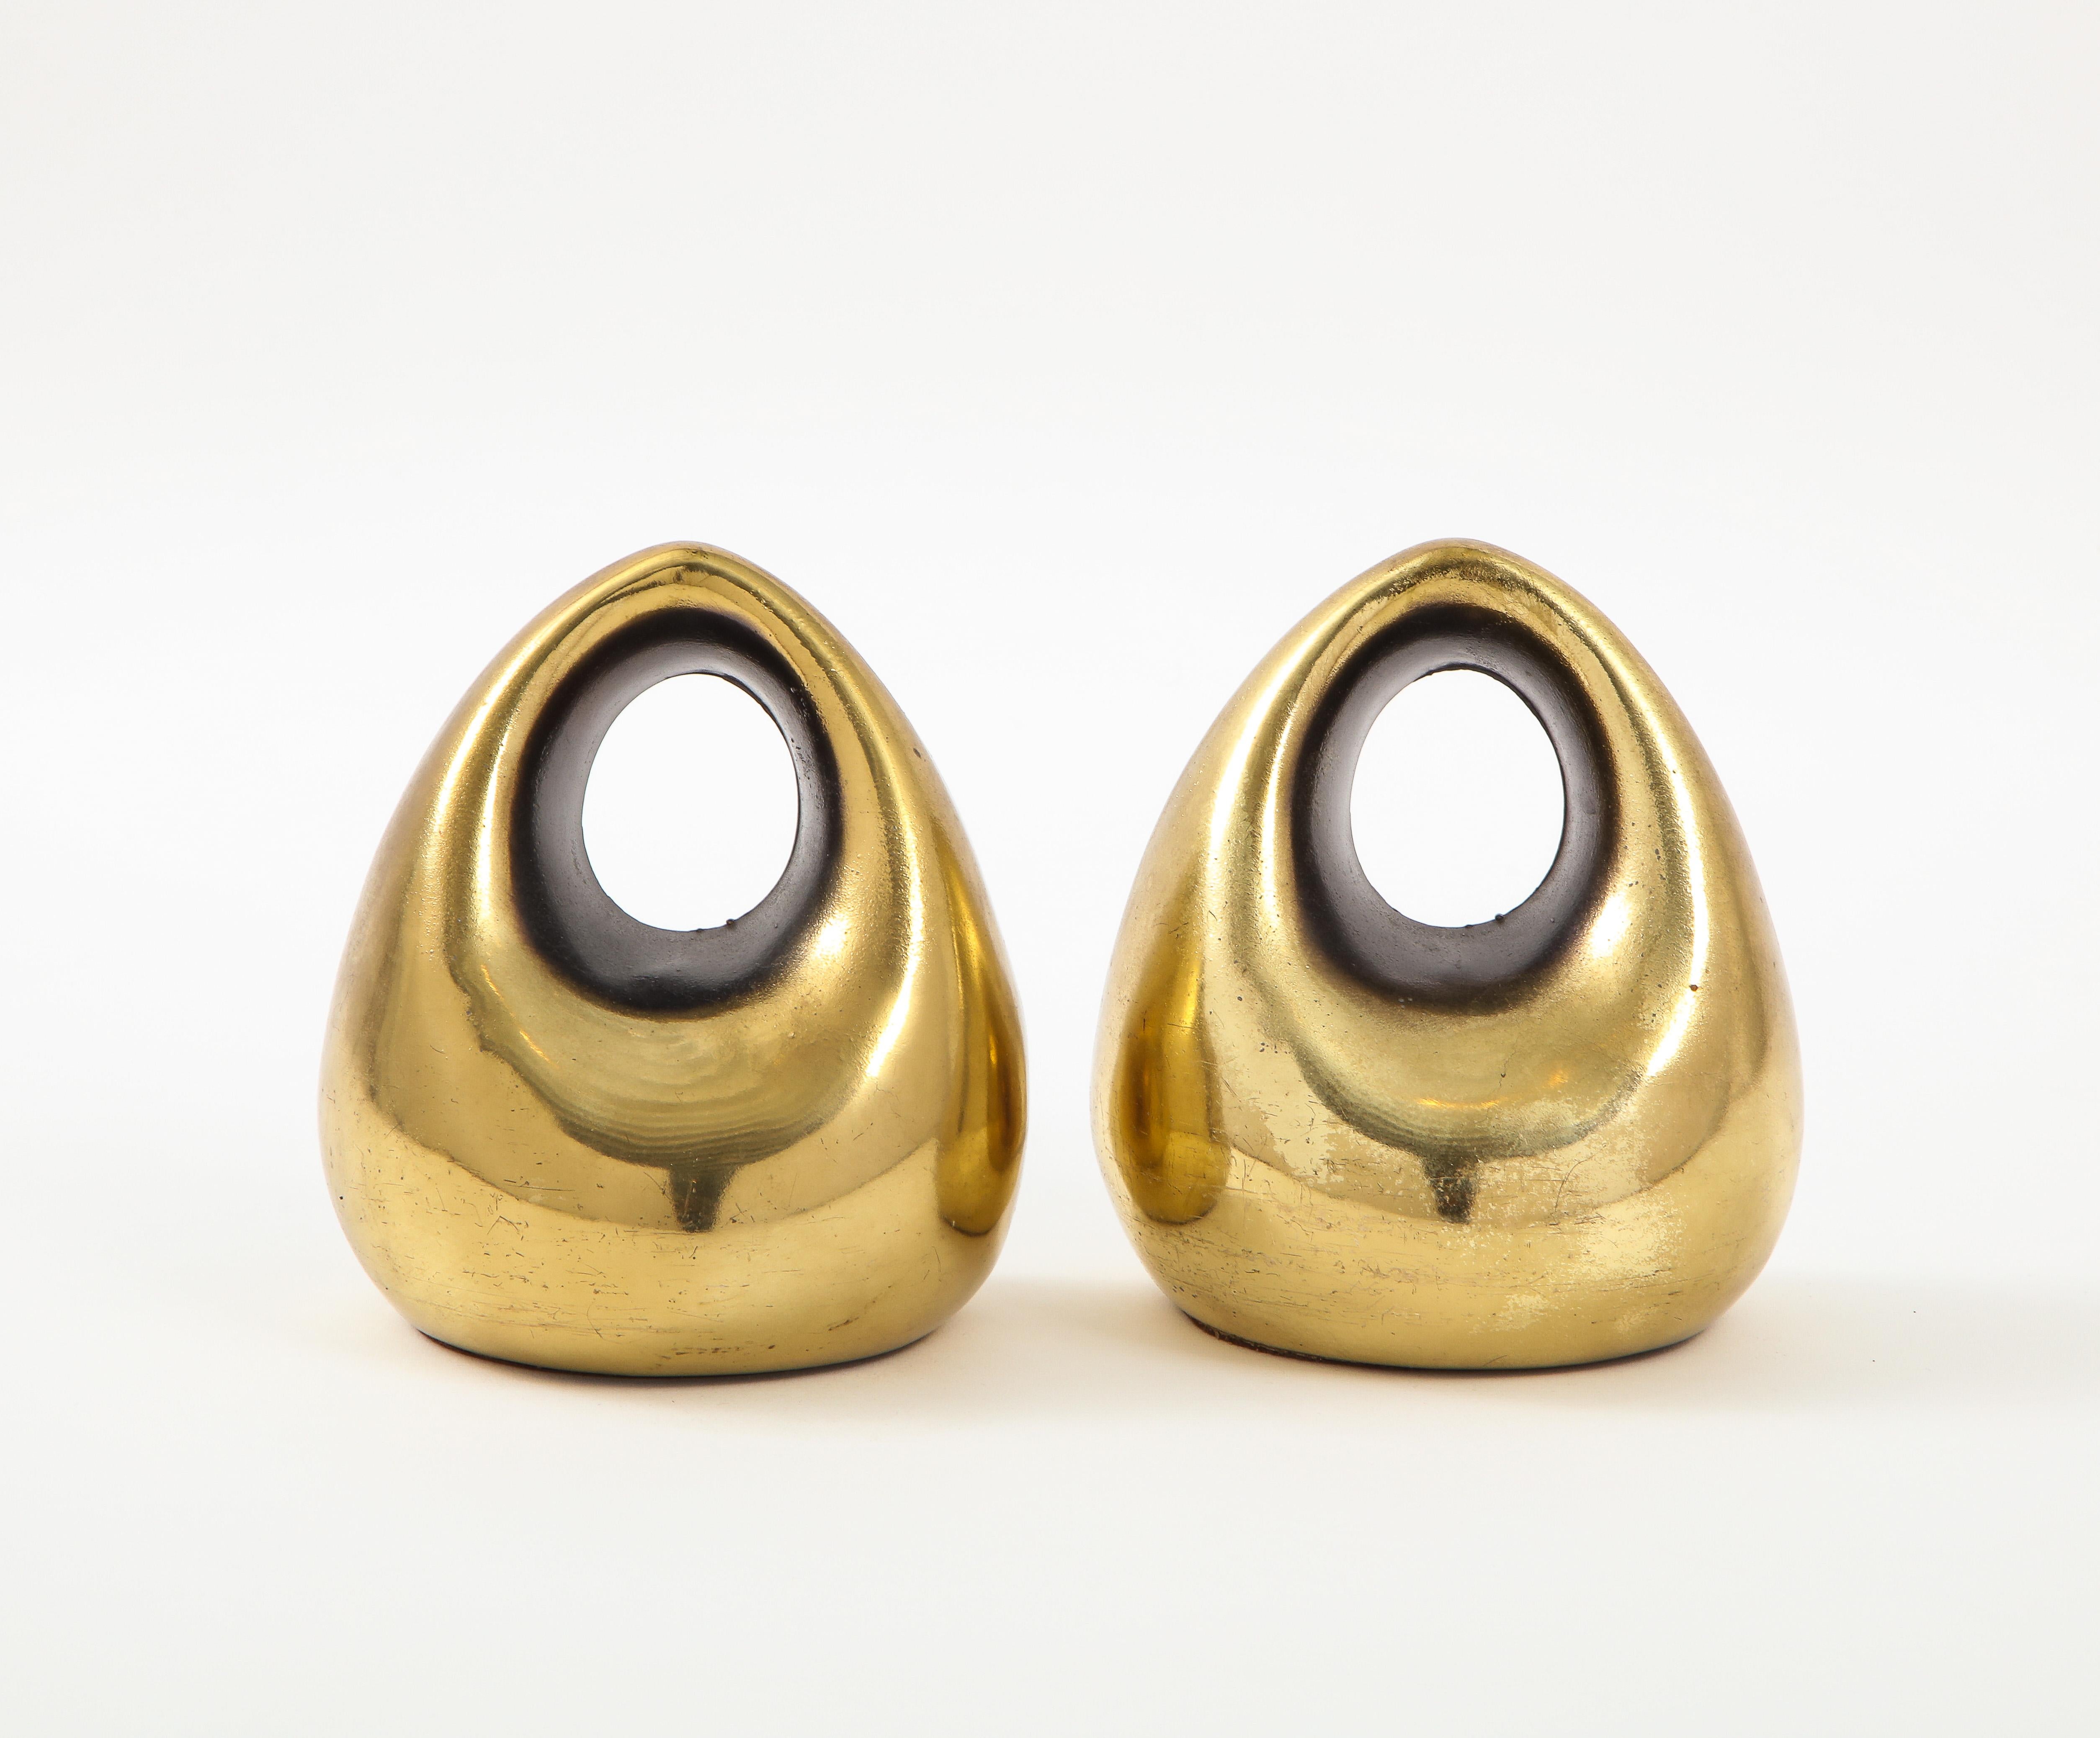 Ben Seibel bookends, brass orb. Rounded sculptural bookends with cutout. Original brass plated finish shows scratches, signs of wear, and crazing. 

Seibel, after studying painting, sculpture and architecture, set up his own studio in Post- War